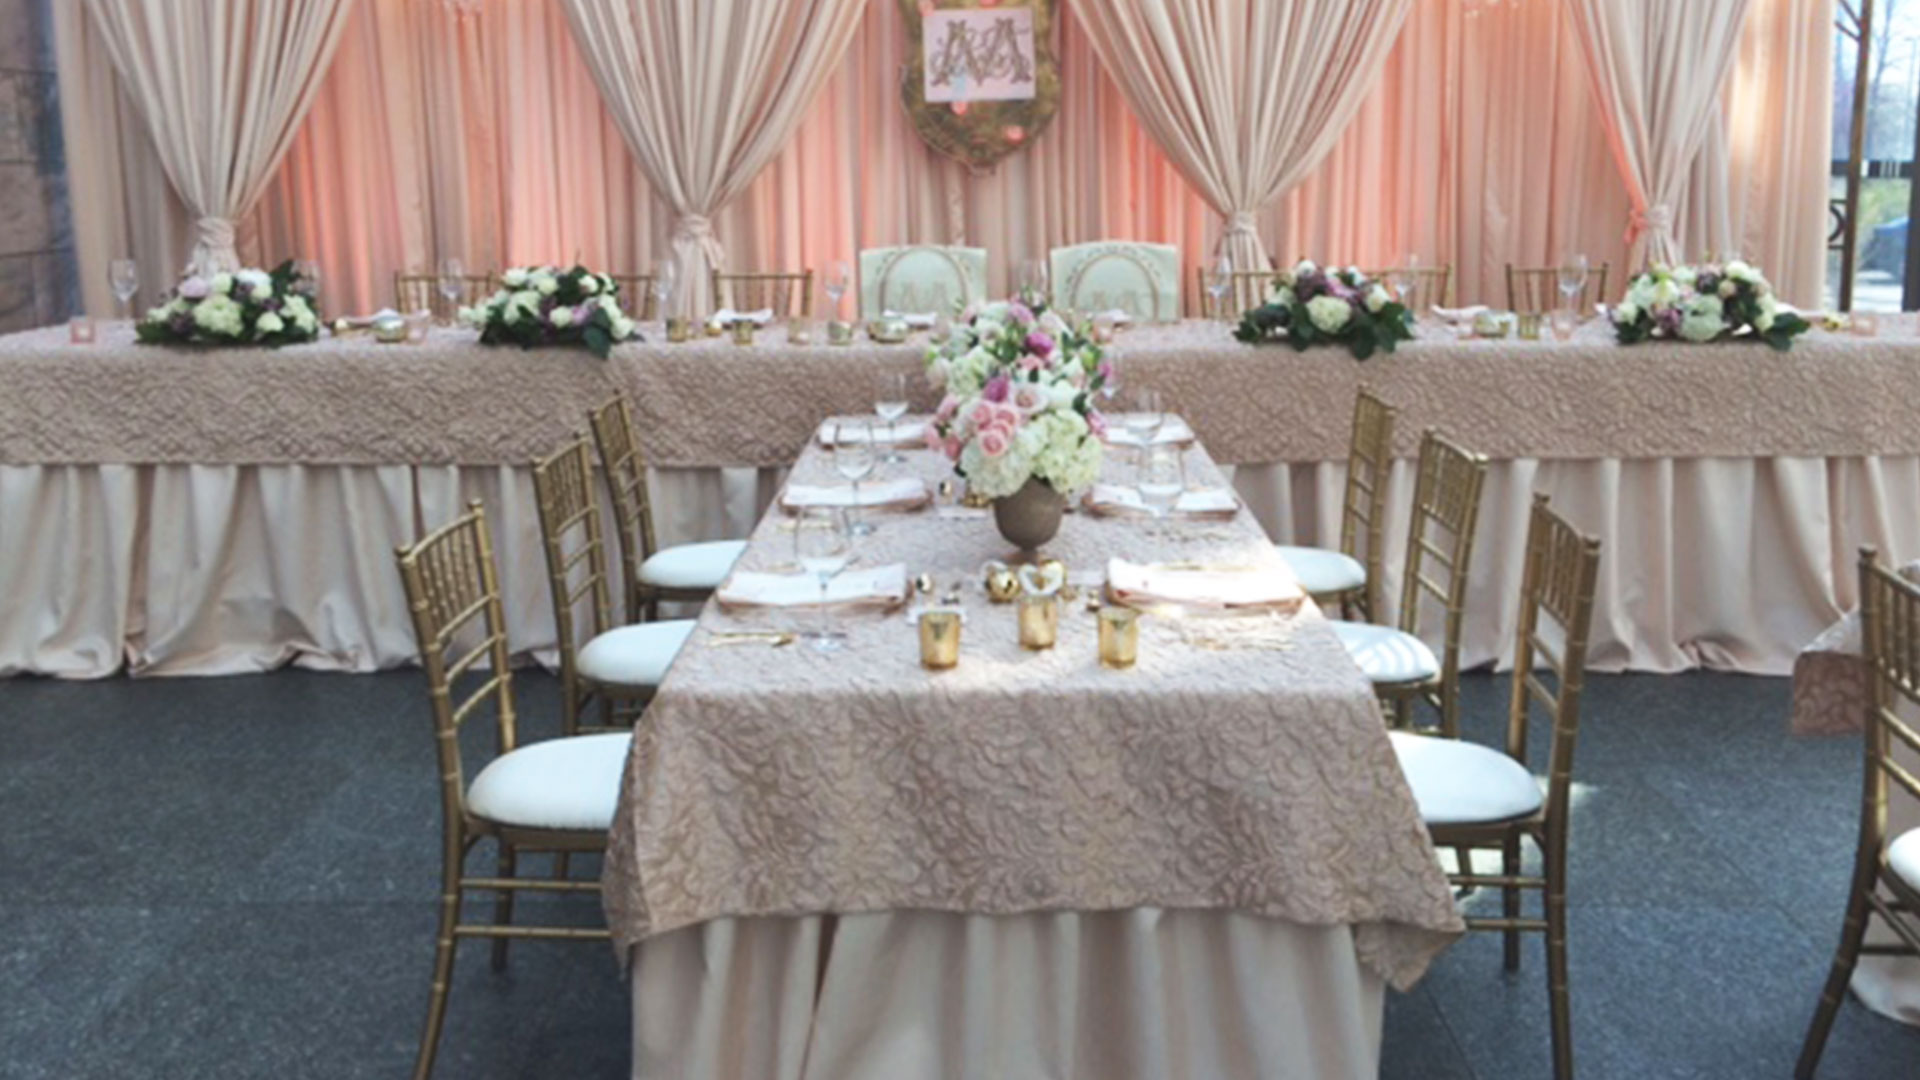 Pink specialty linens with gold chivari chairs and draping for wedding reception